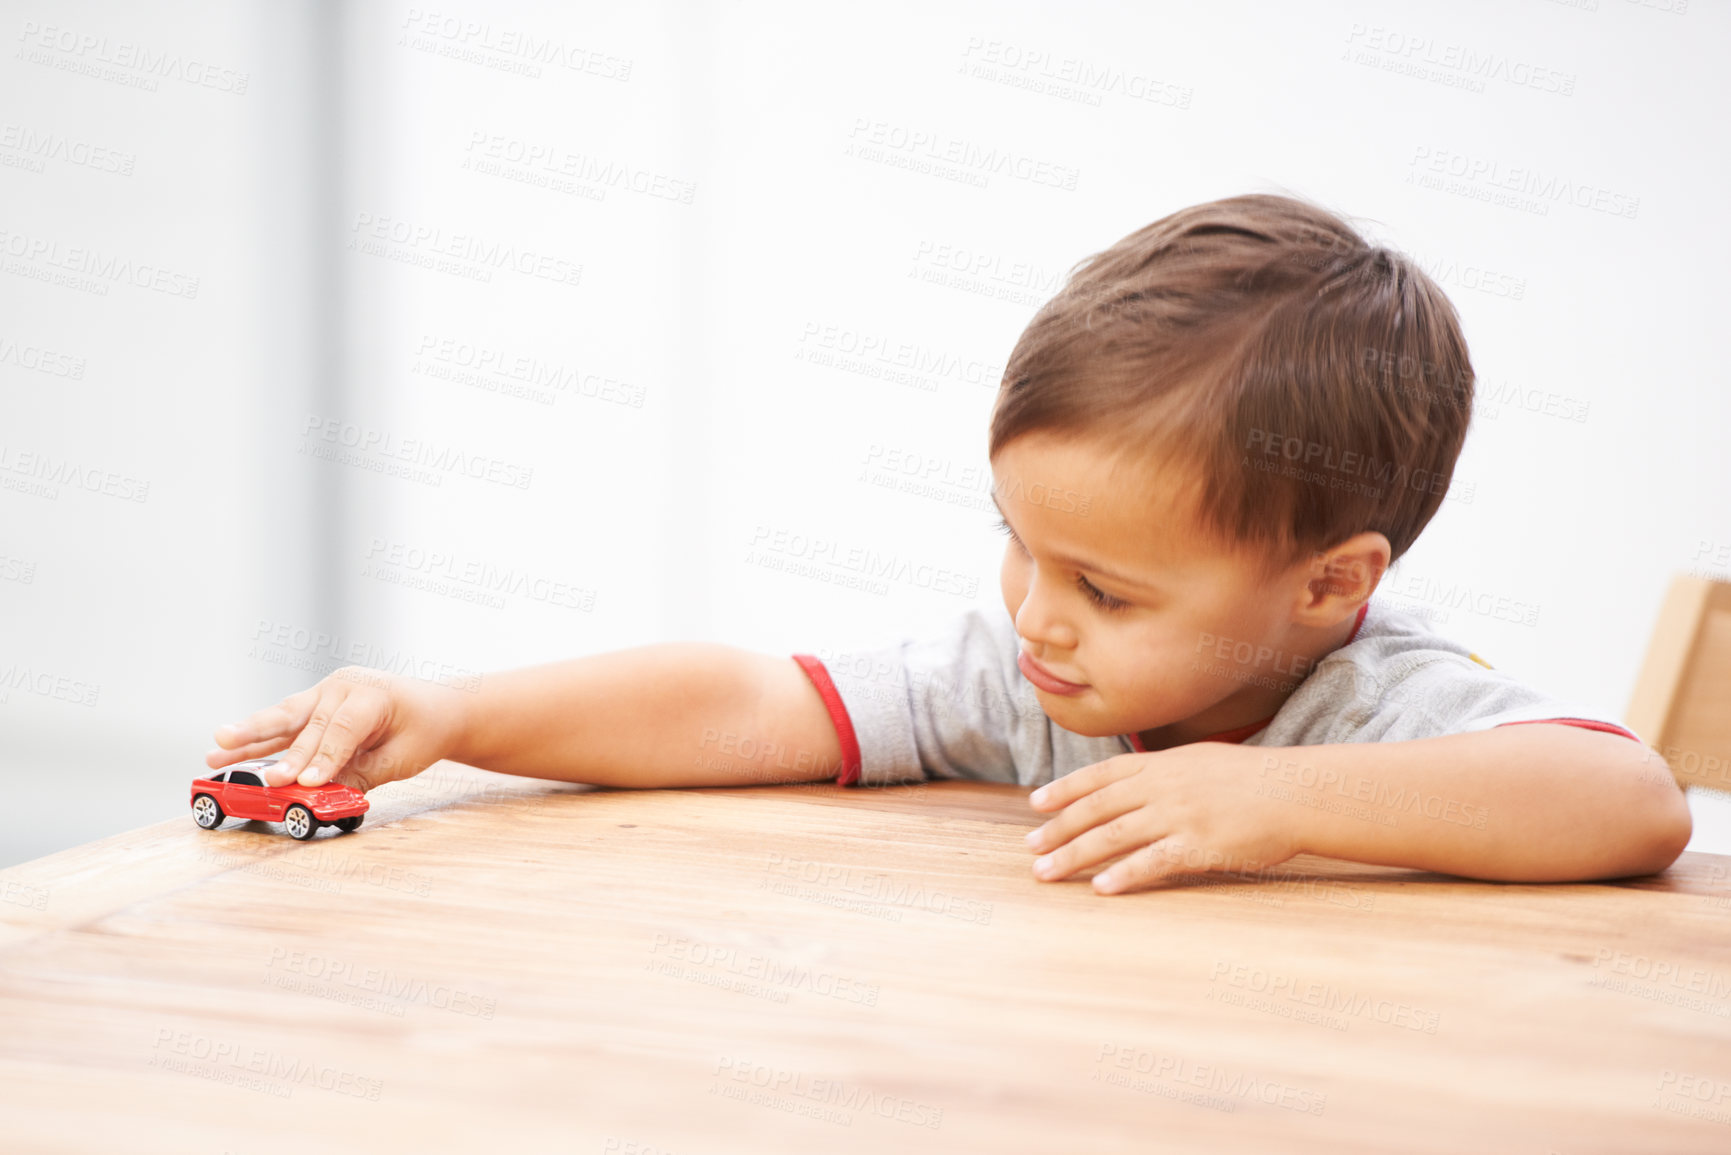 Buy stock photo Shot of a cute young boy playing with a toy car